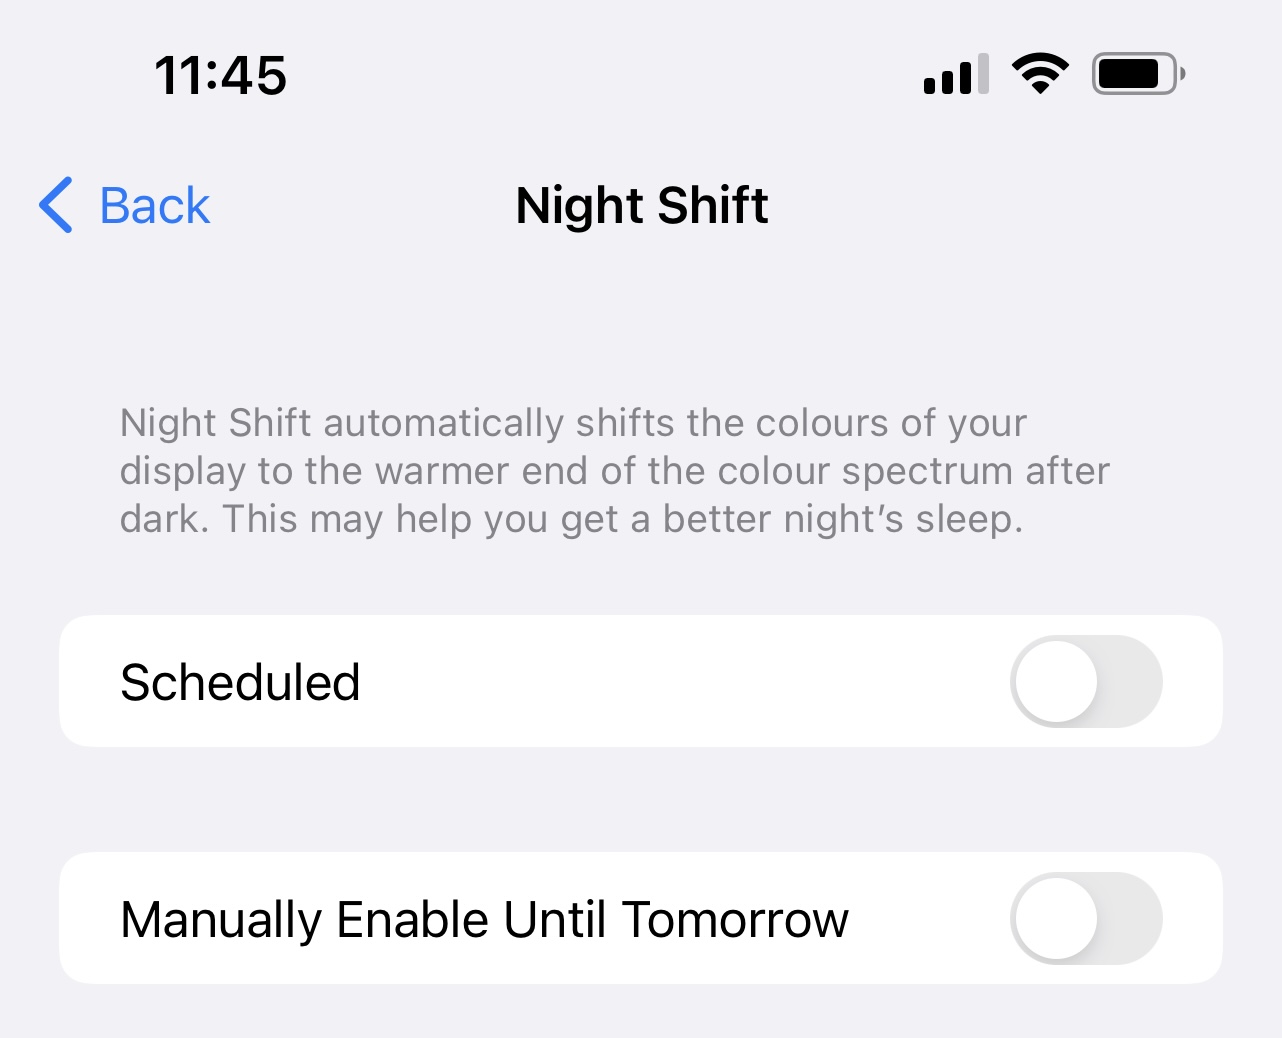 Here's what Night Shift looks like : r/apple